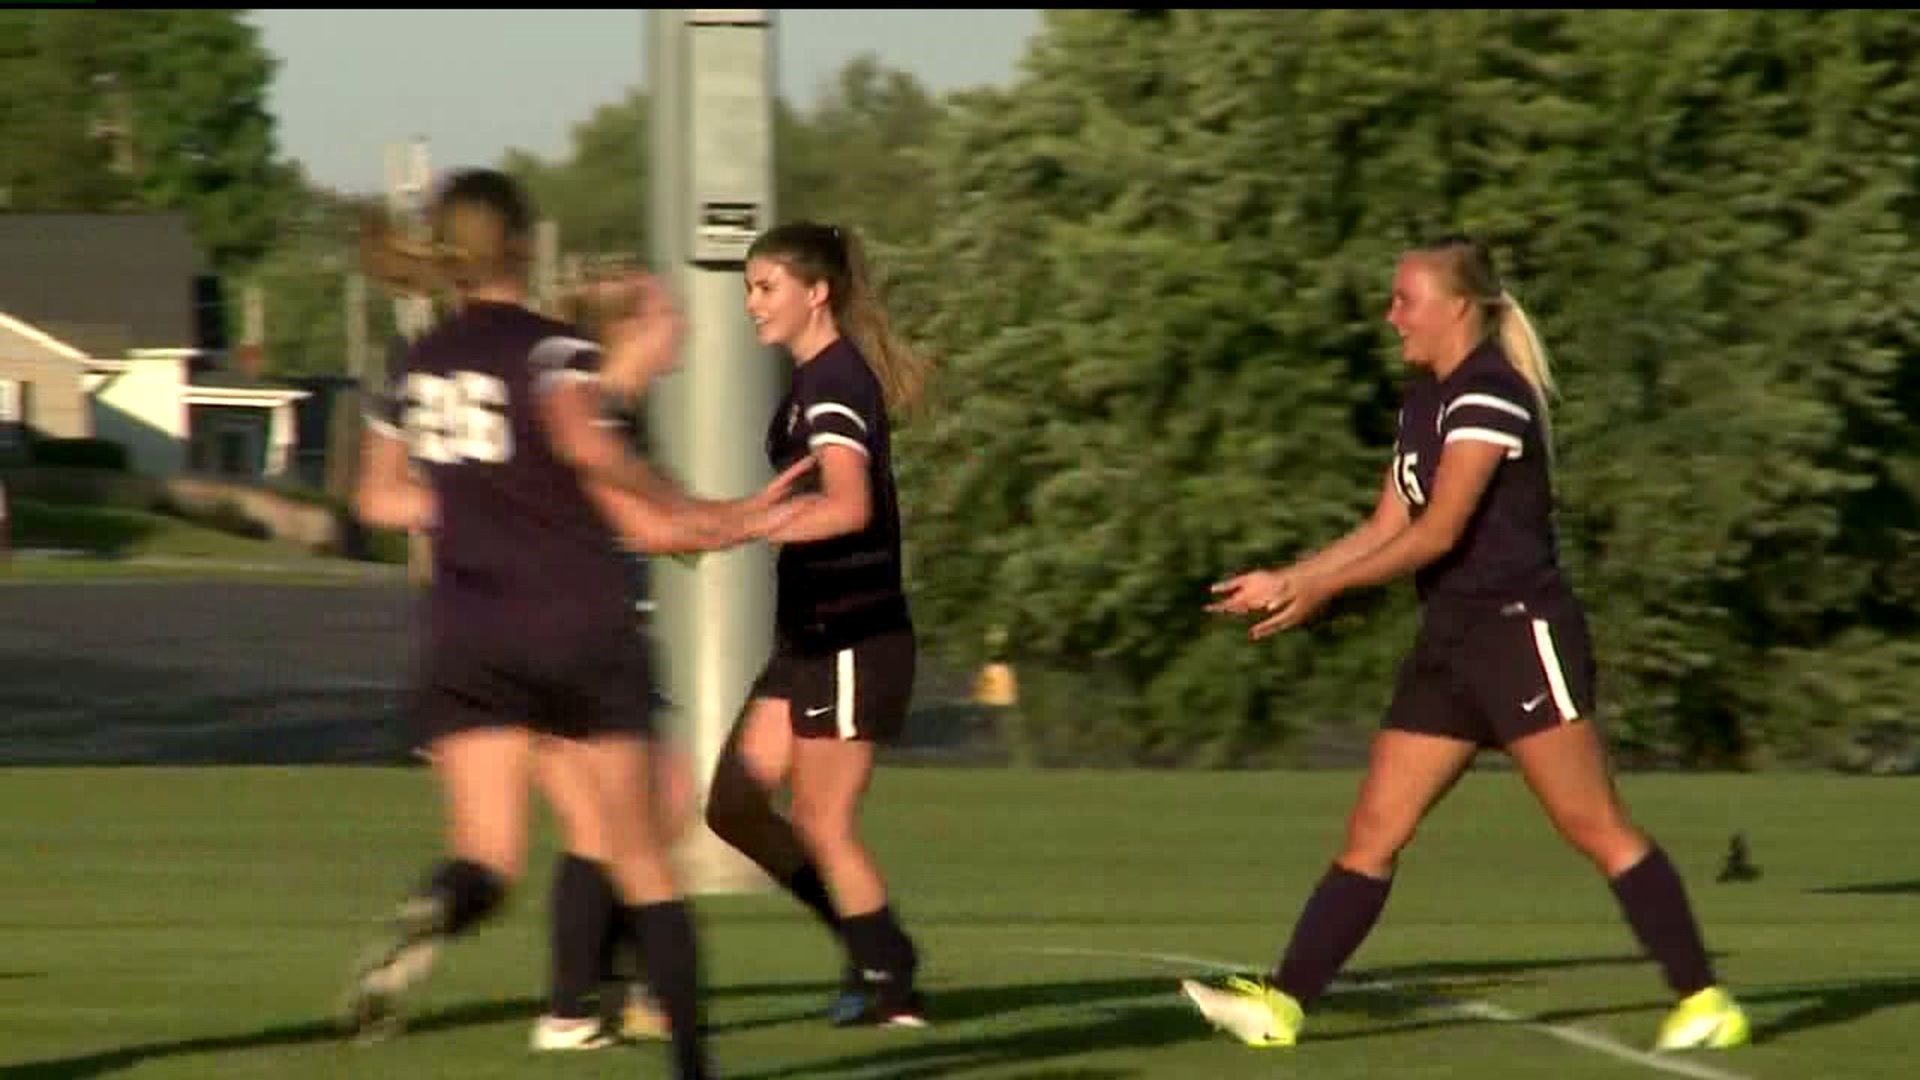 P.V. girls best Muscatine in Substate semifinal